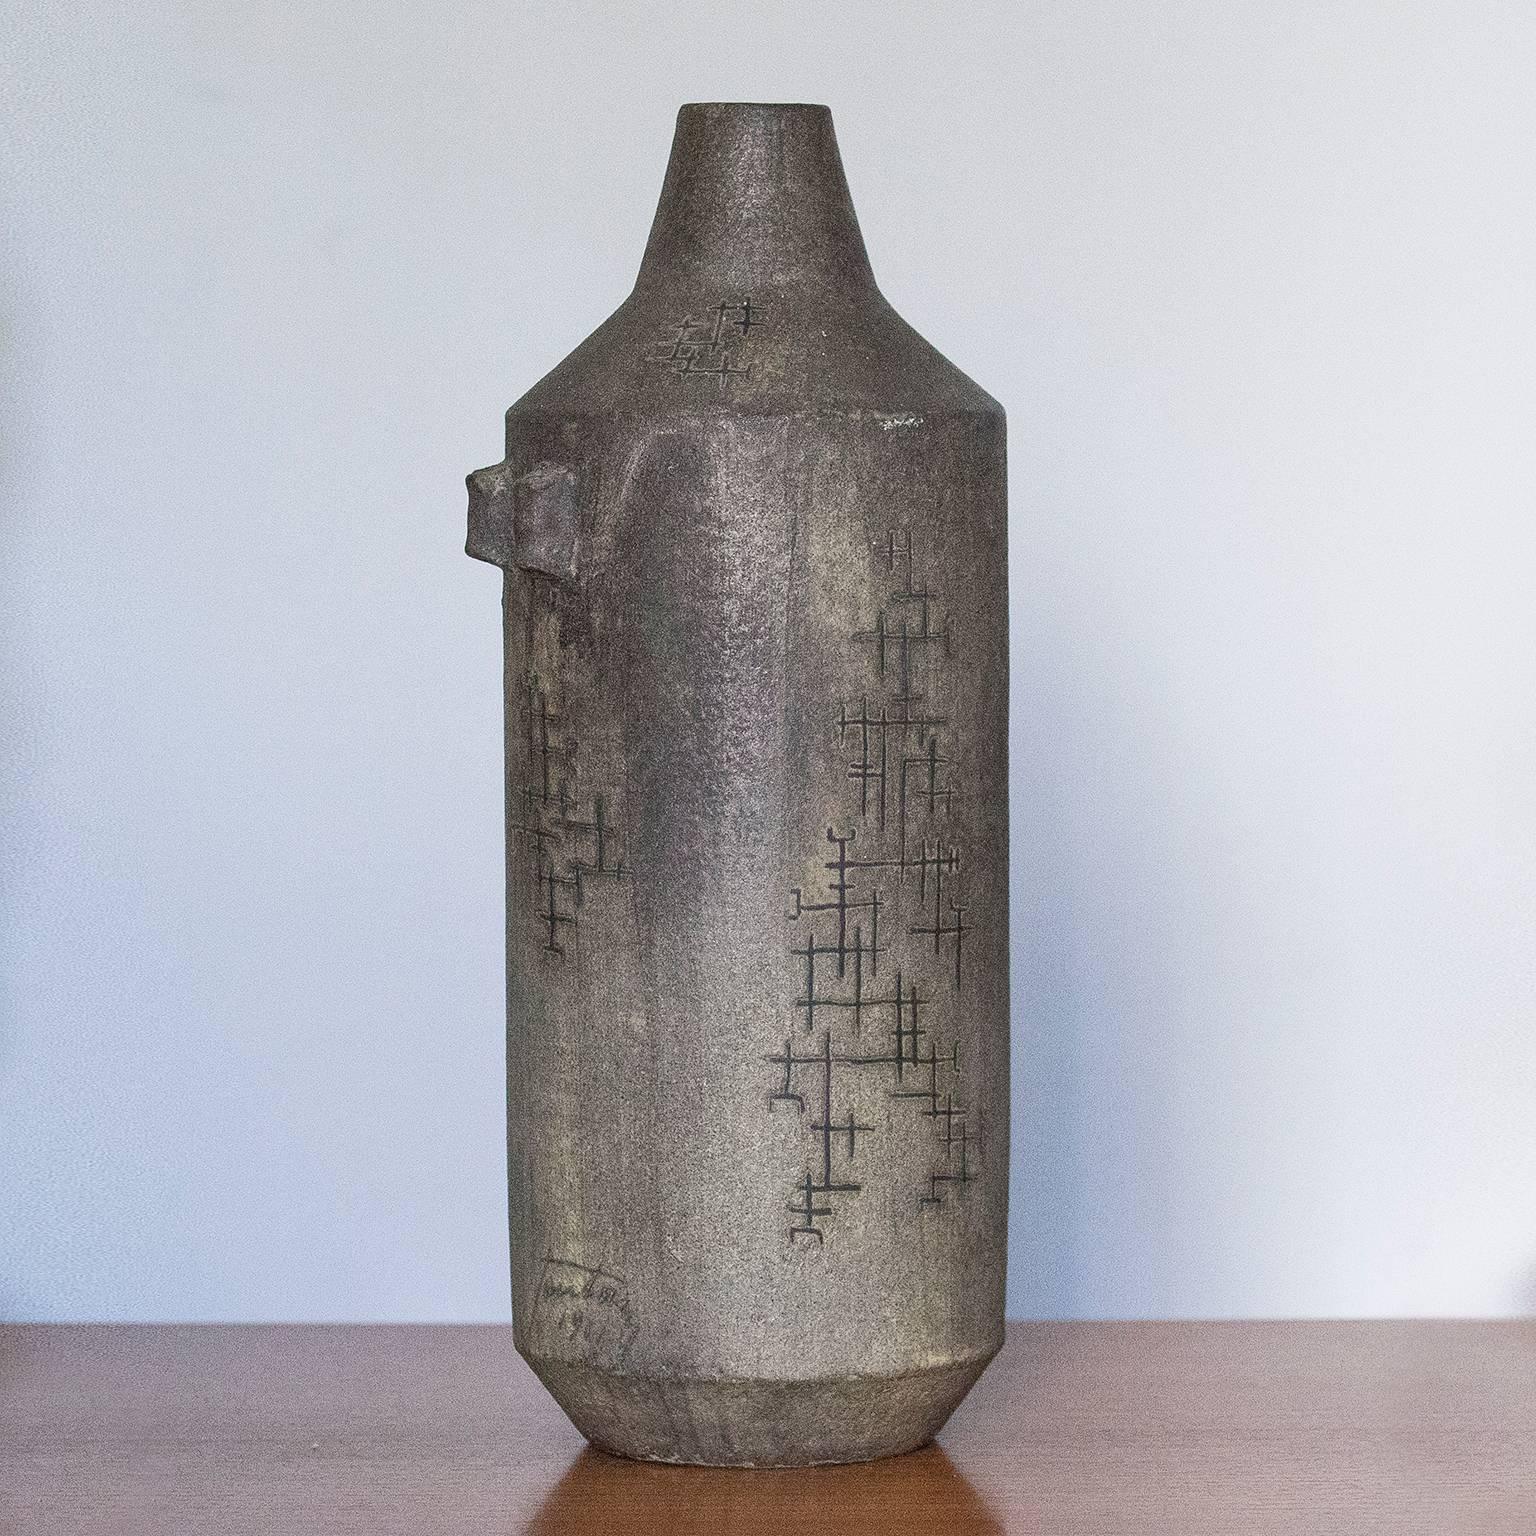 A tall and important unique studio vase in grey green ceramic by Marcello Fantoni, Florence, Italy, (1915-2011). 
Hand-built earthenware with rough, matte grey glaze signed on the side Fantoni 1961. Directly acquired from the artist by an Italian